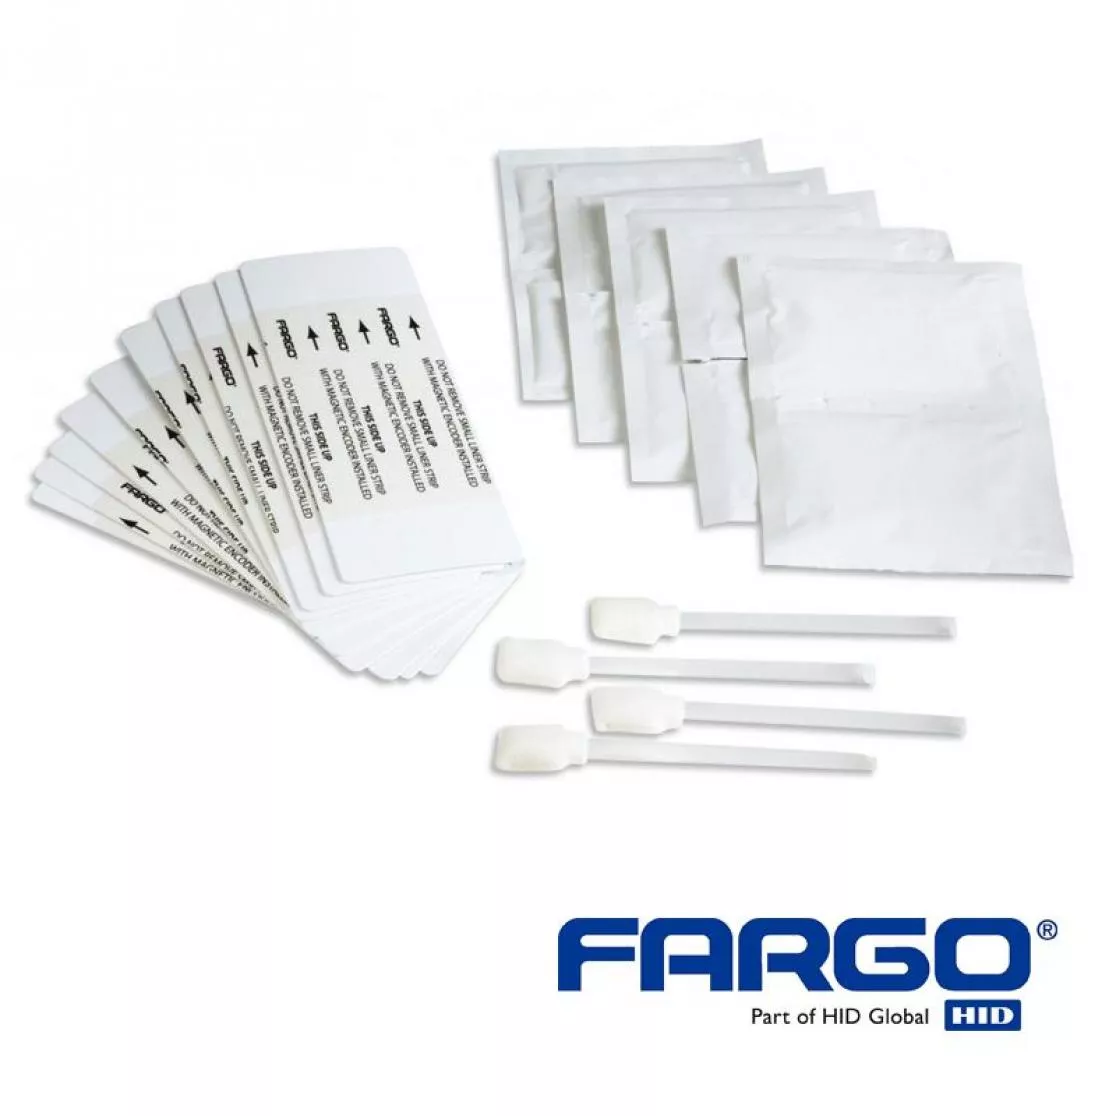 Cleaning kit for hid fargo c50 card printer